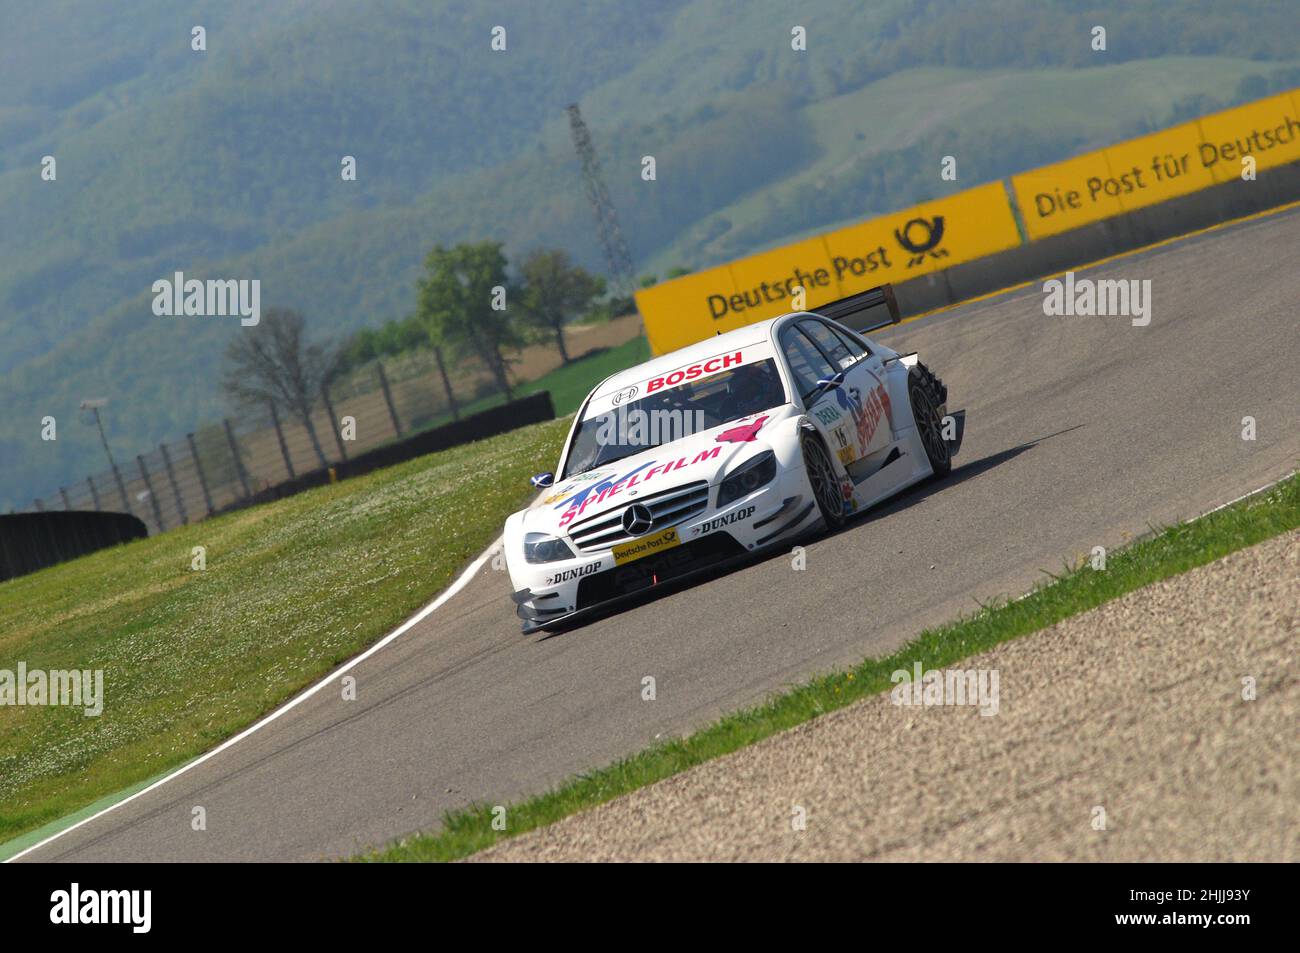 Mugello Circuit, Italy 2 May 2008: Susie Stoddart in action with AMG Mercedes C-Klasse 2007 of Persson Motorsport Team during Race of DTM at Mugello C Stock Photo